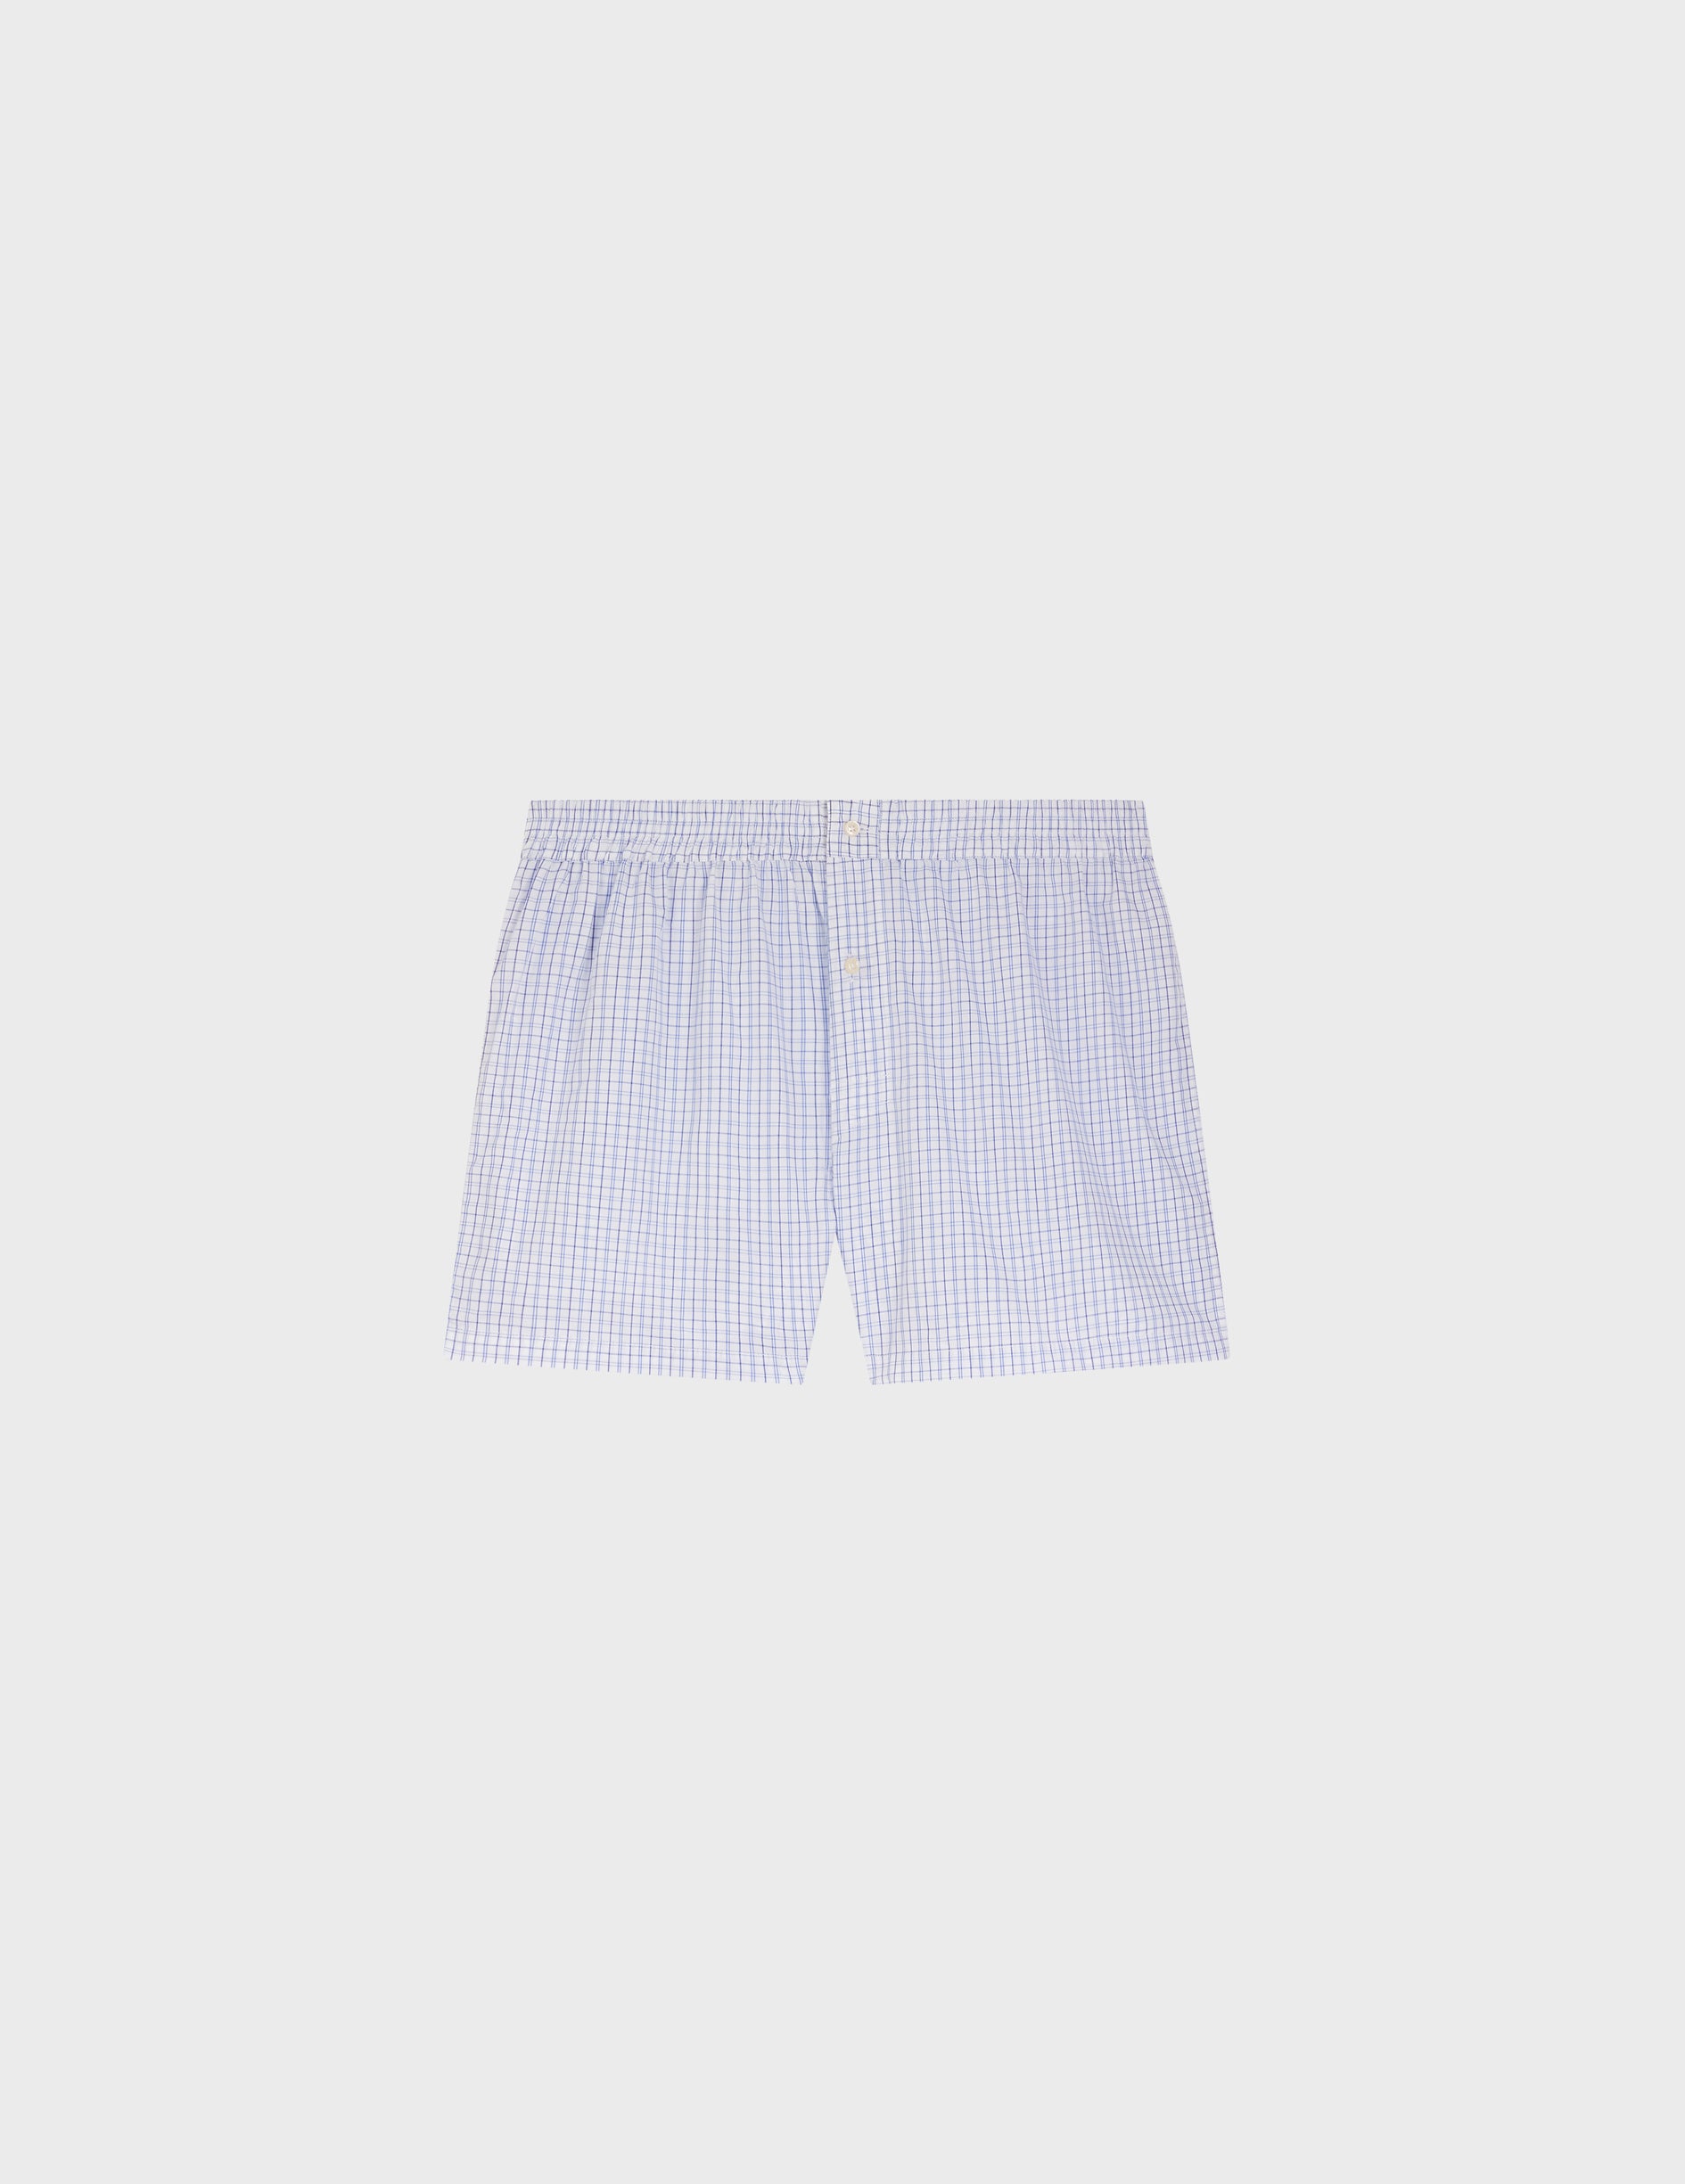 Weekly pack of 5 striped and checked cotton boxer shorts